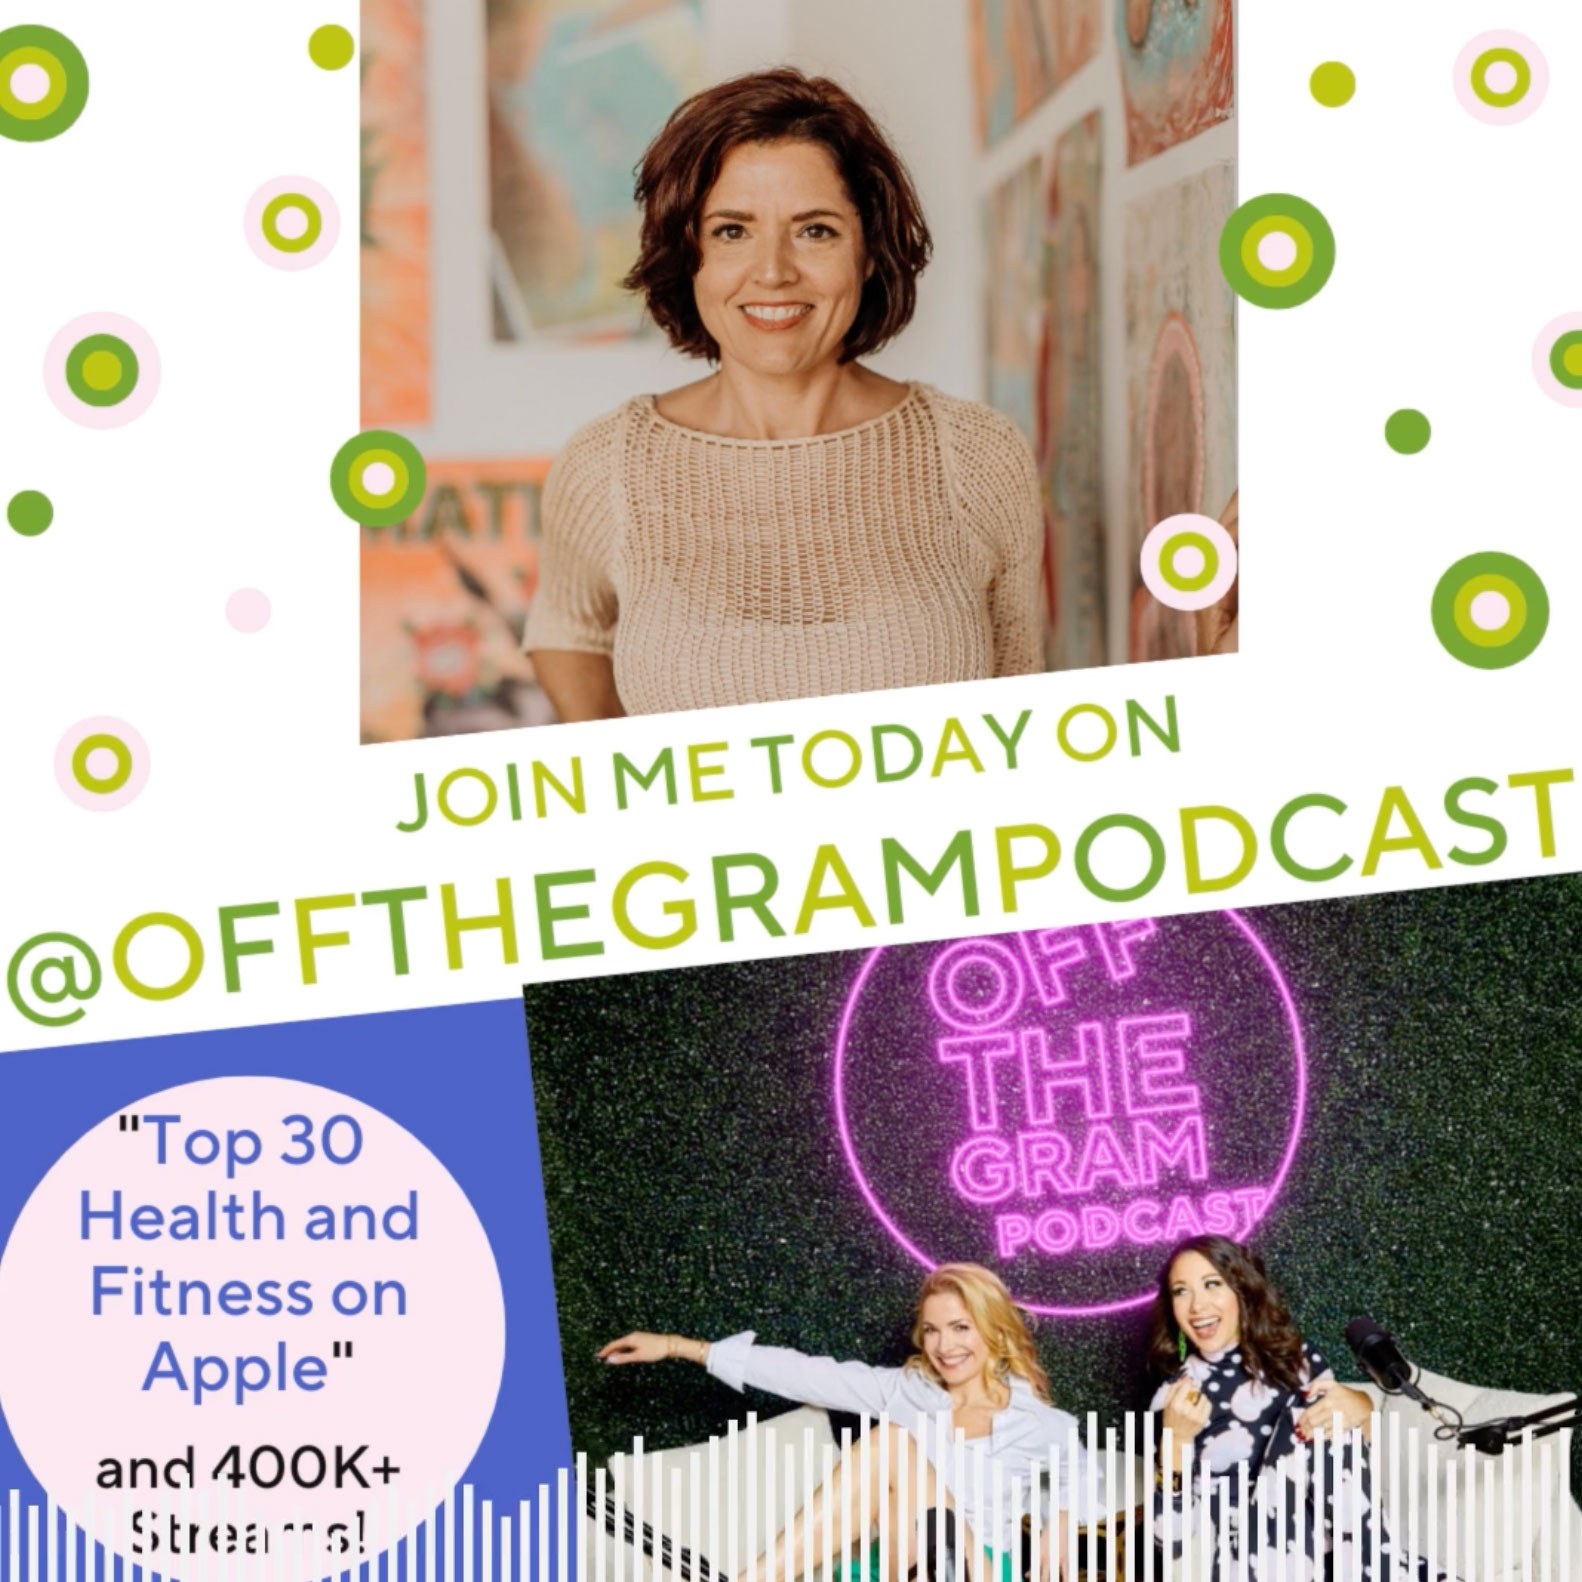 Off the Gram Podcast Interview